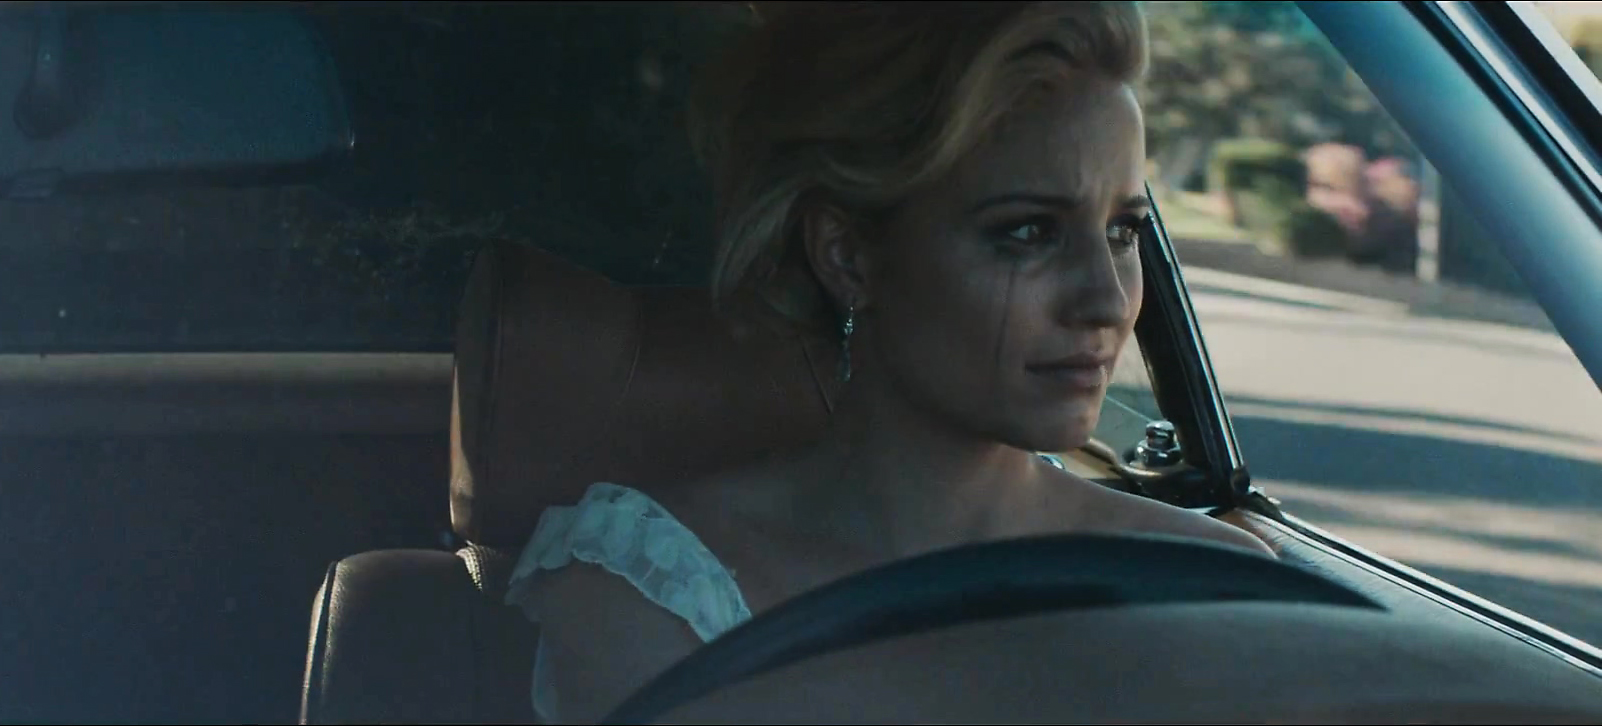 Dianna Agron in Music Video: I'm Not the Only One